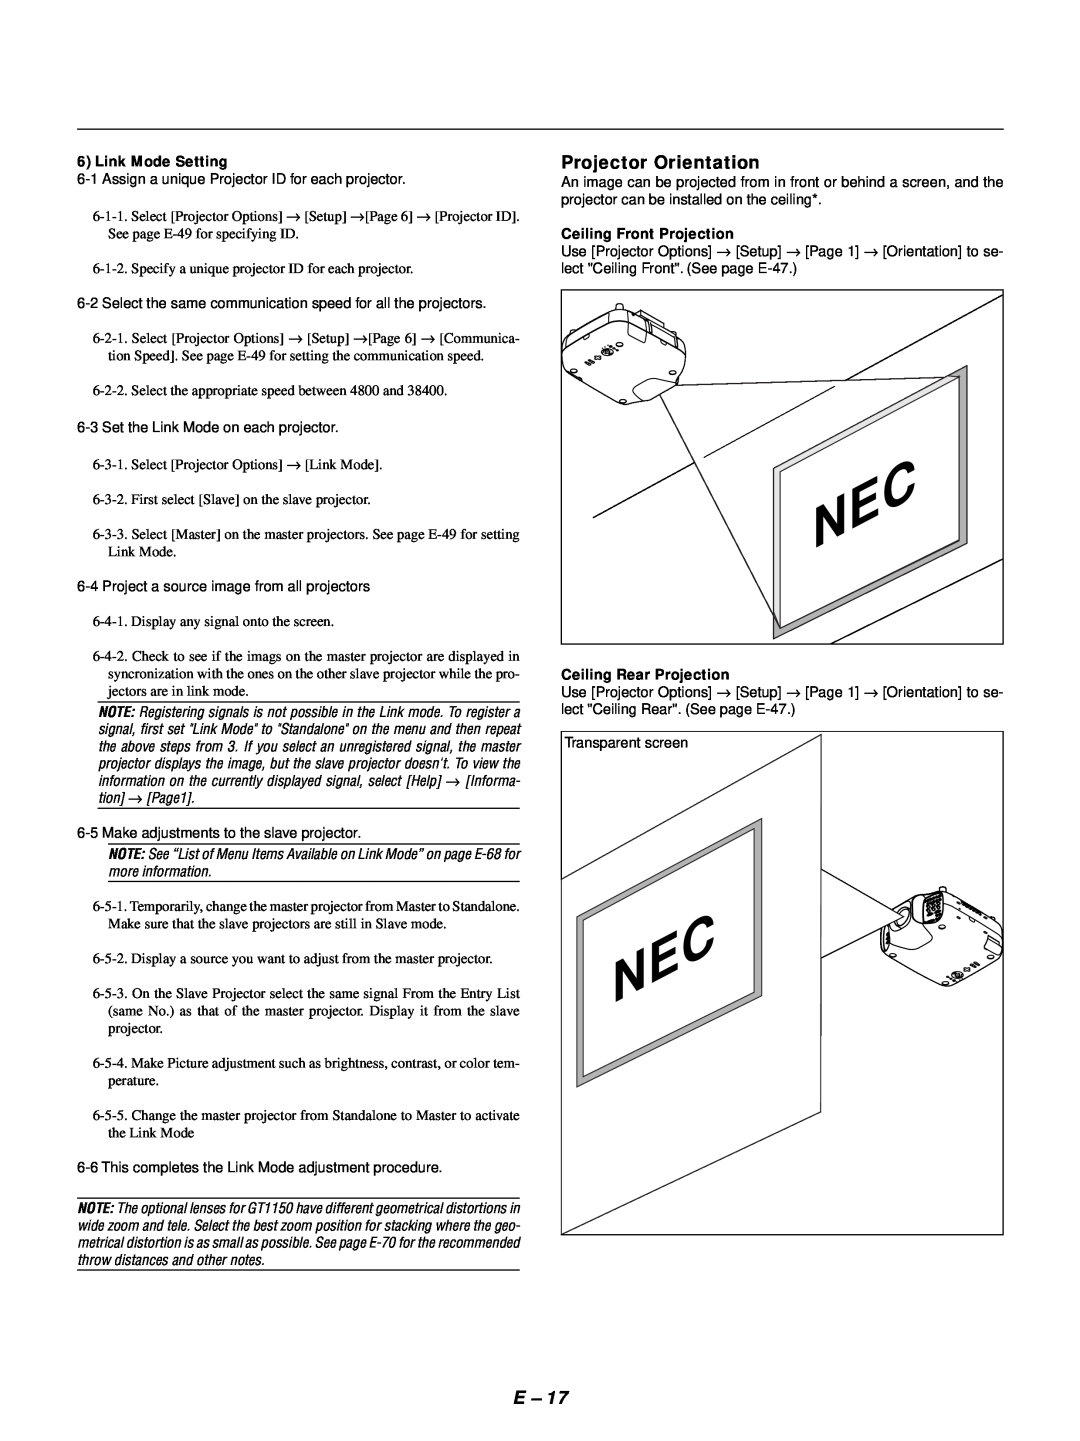 NEC GT1150 user manual Projector Orientation, Link Mode Setting, Ceiling Front Projection, Ceiling Rear Projection 